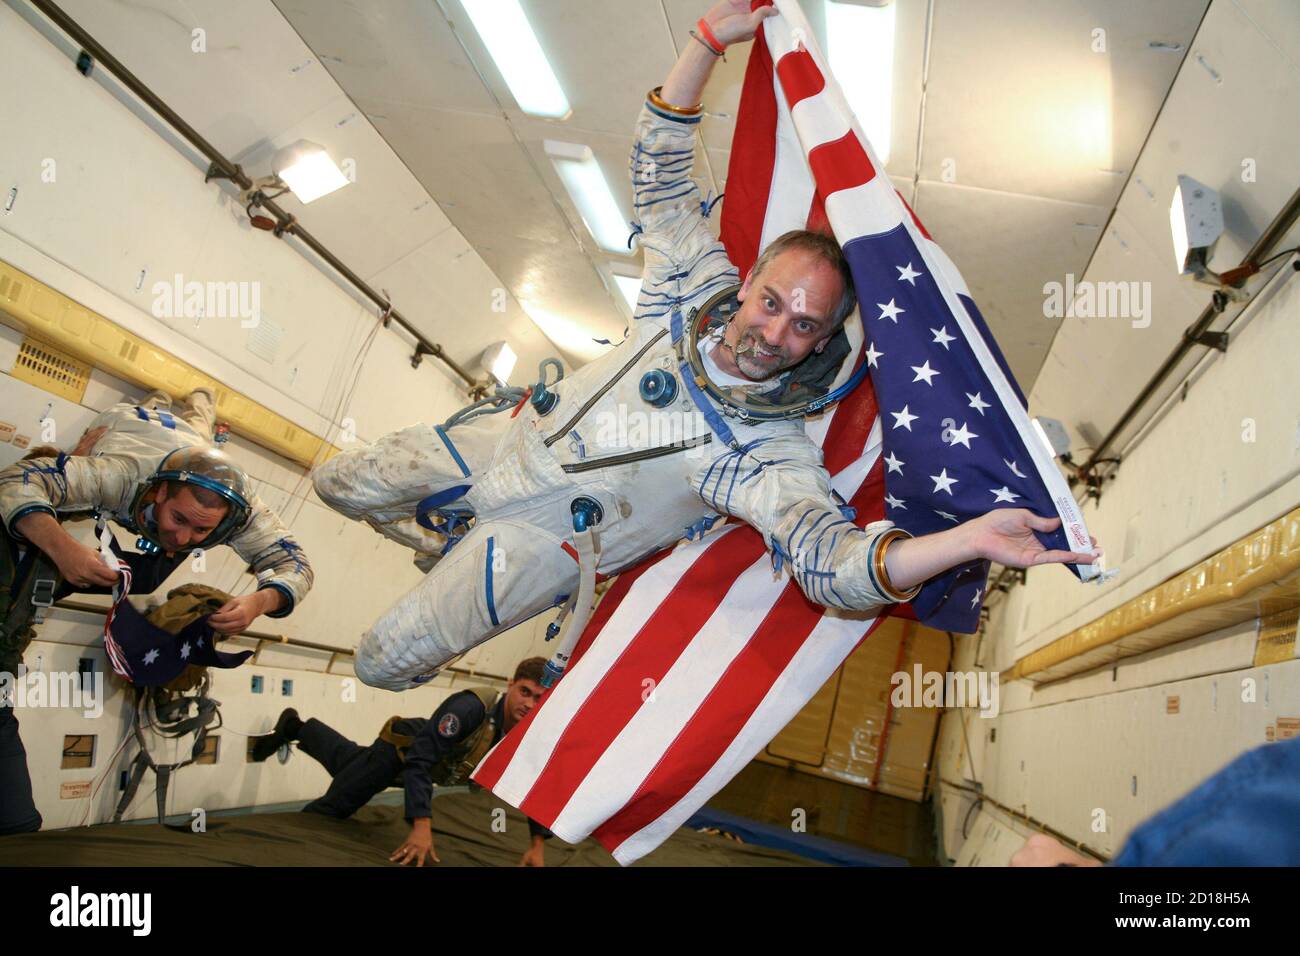 Space tourist Richard Garriott of the U.S. (R) and his back-up Nik Halik of  Australia hold their national flags as they undergo a zero-gravity flight  in the Moscow region July 9, 2008.